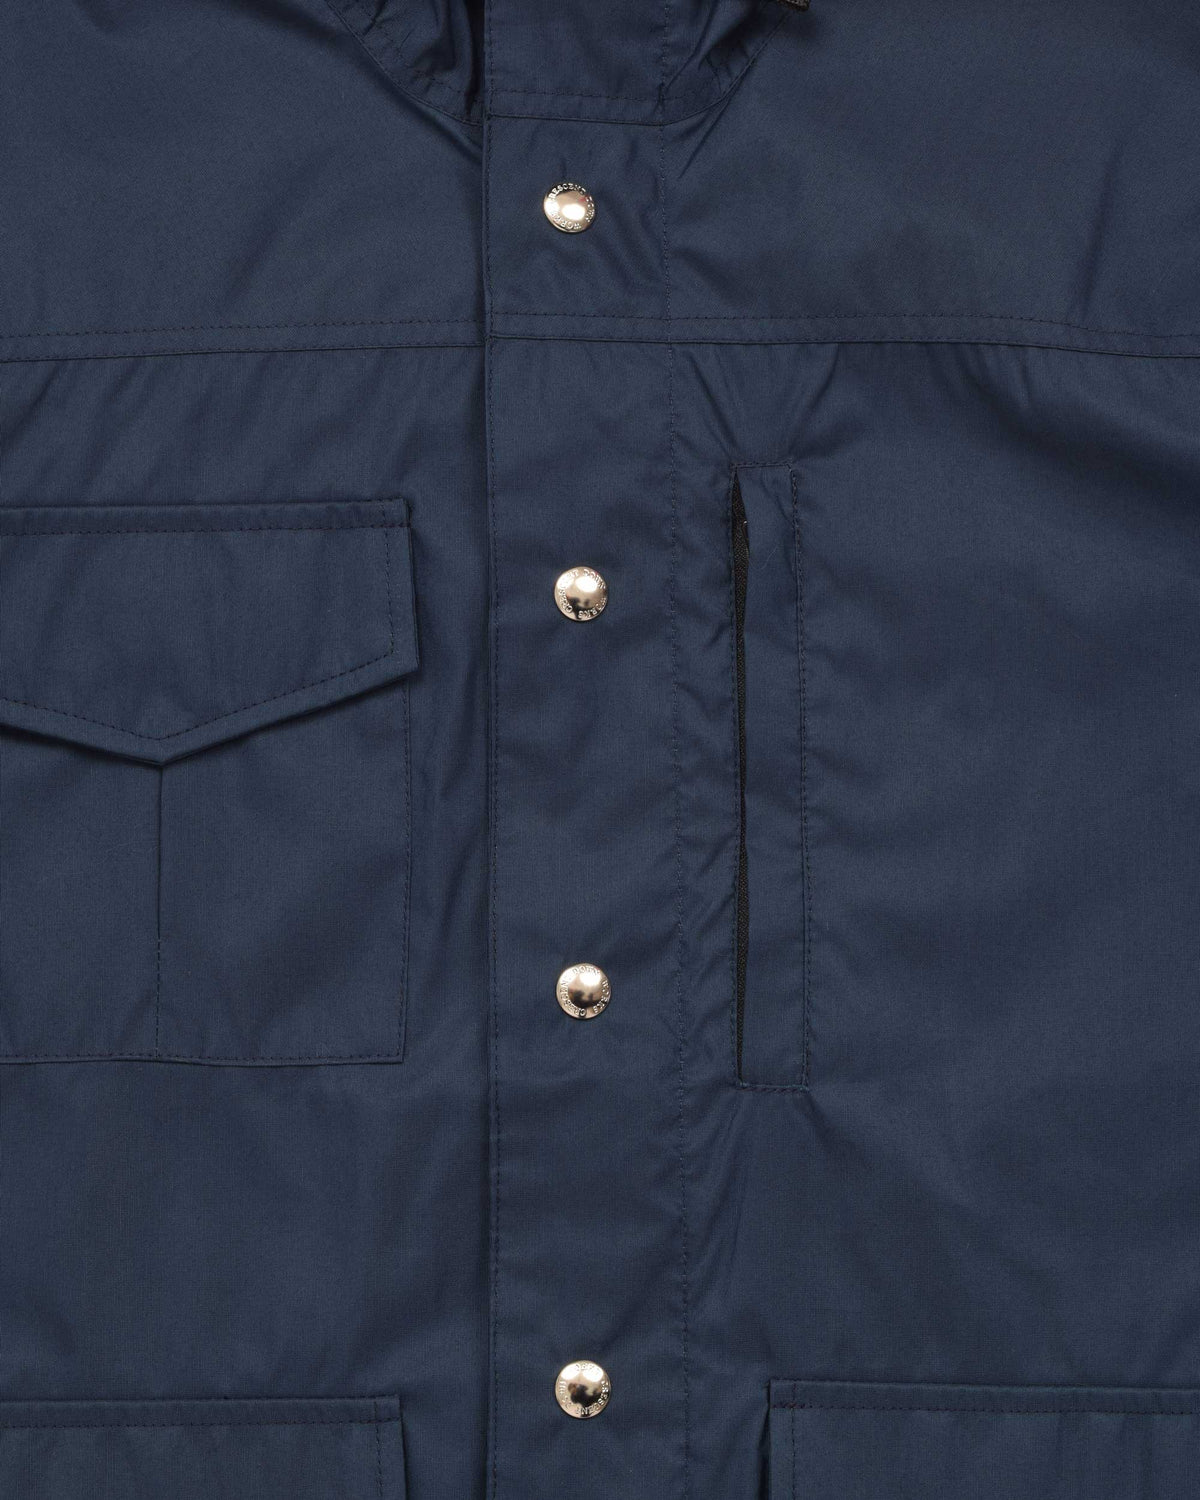 Michi Jacket in Navy front pockets detail